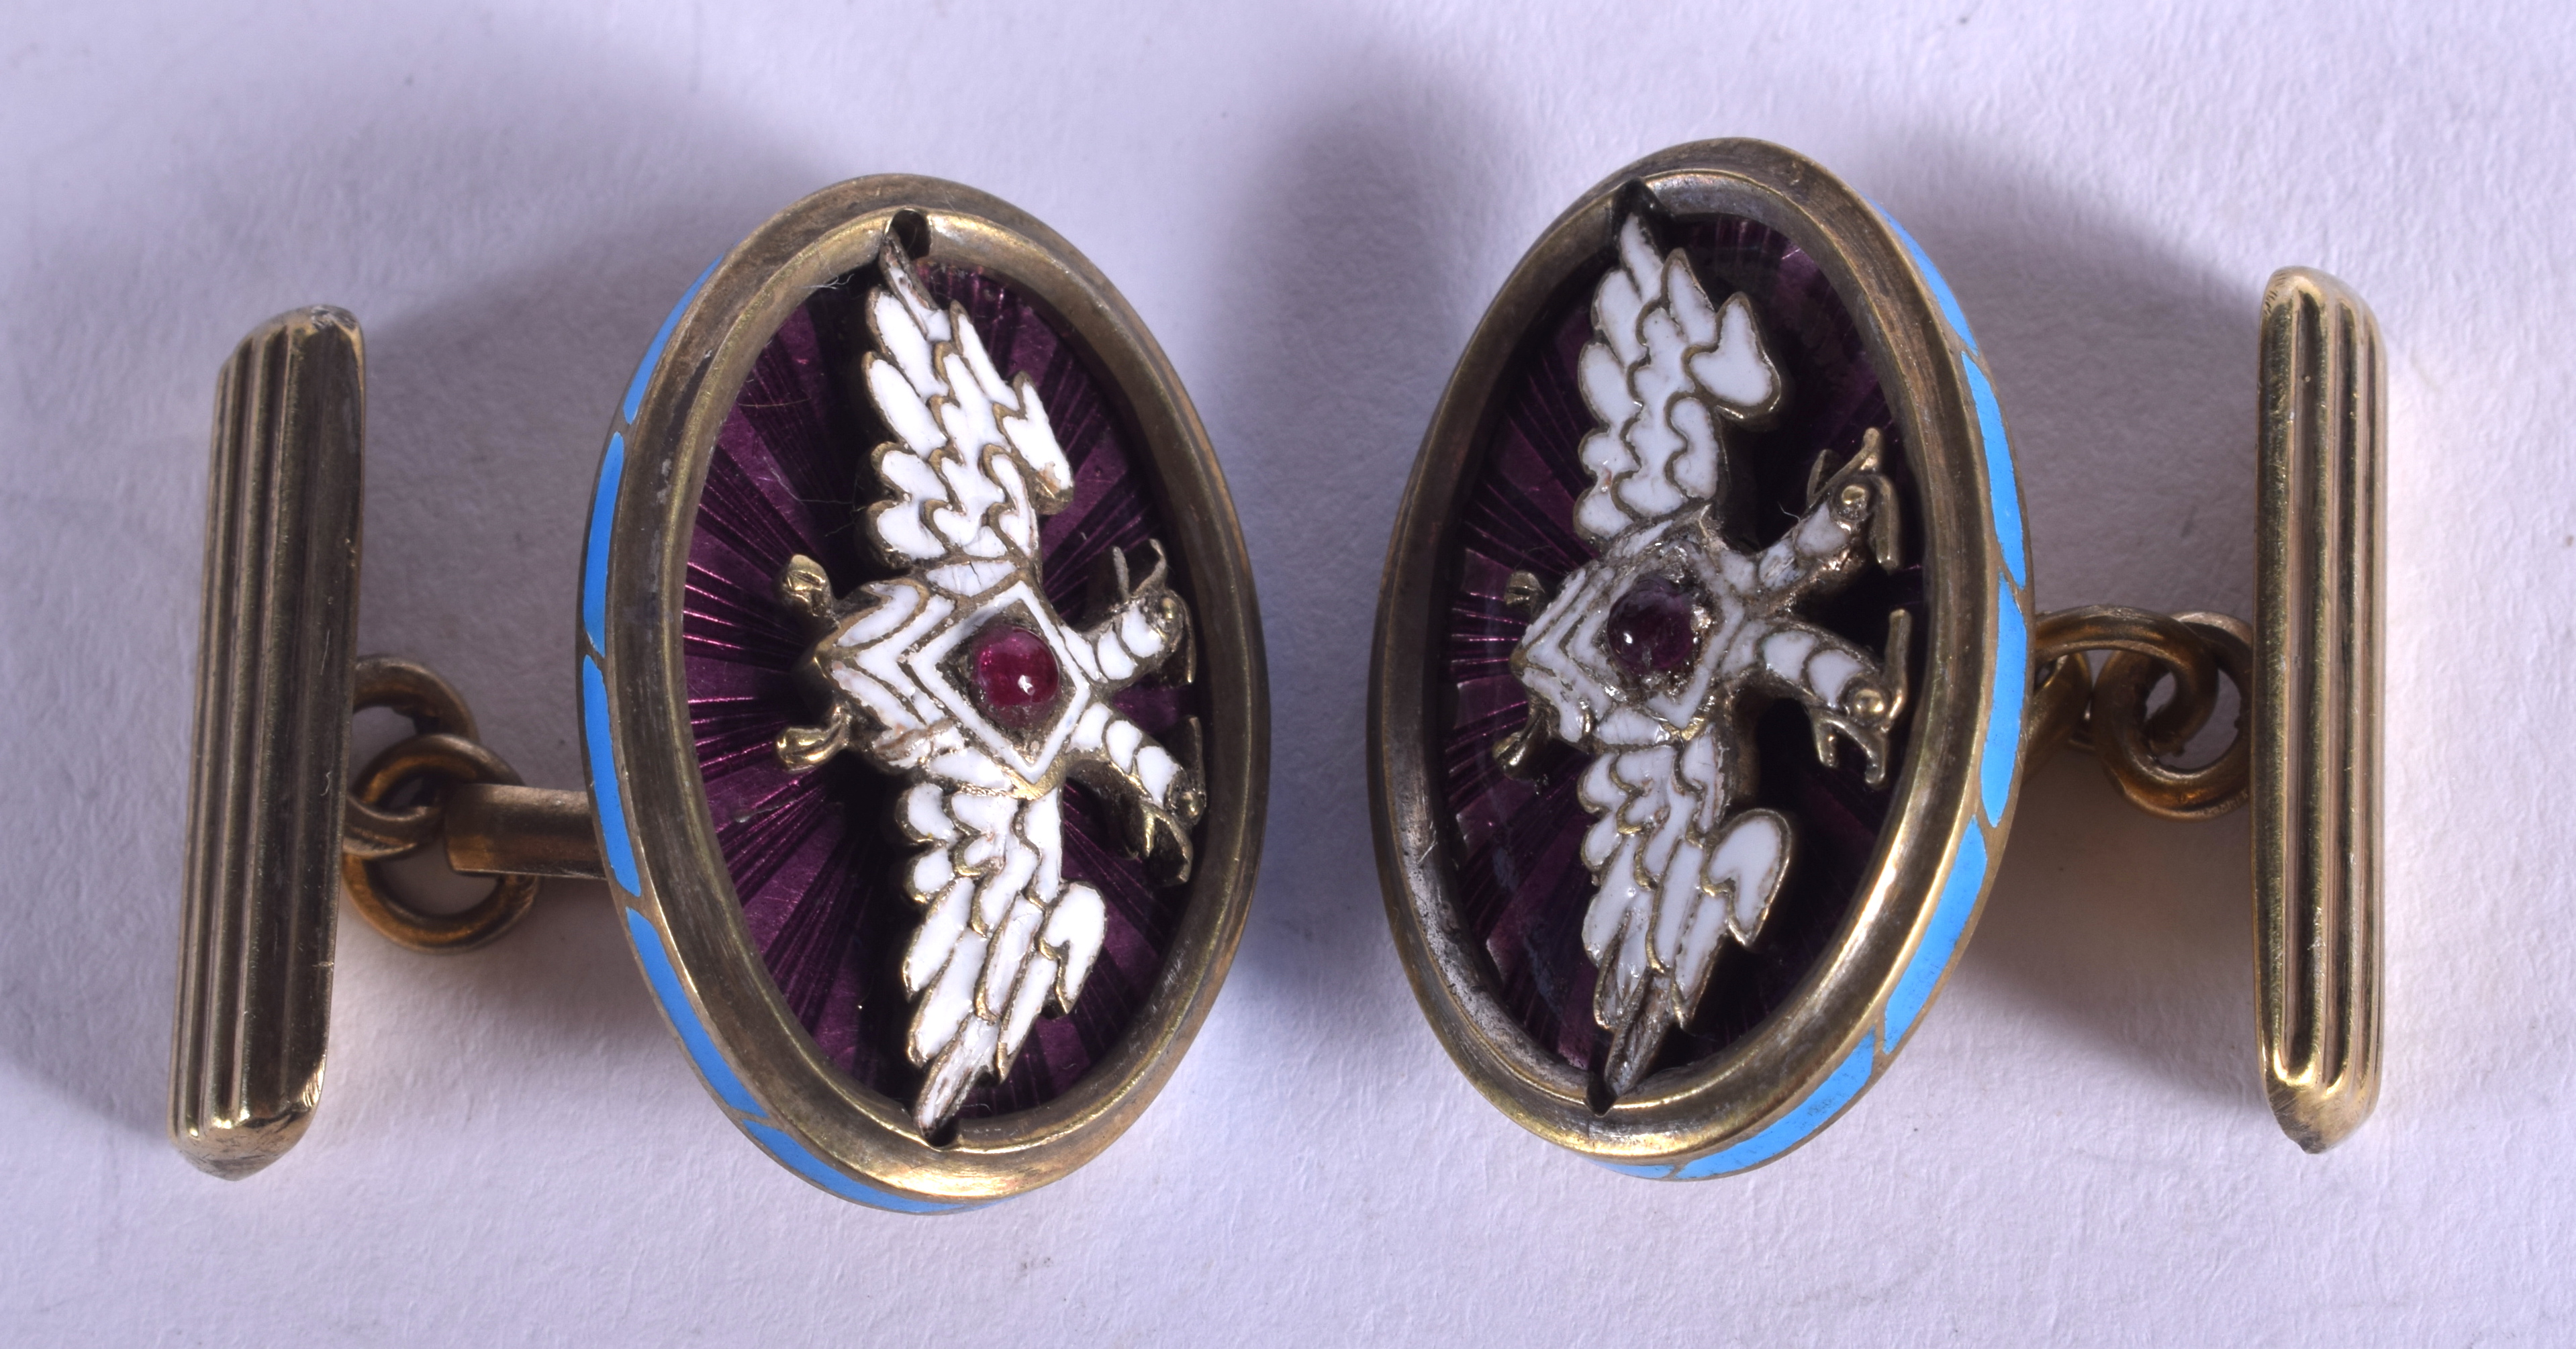 A PAIR OF CONTINENTAL JEWELLED SILVER GILT CUFFLINKS. 21 grams.